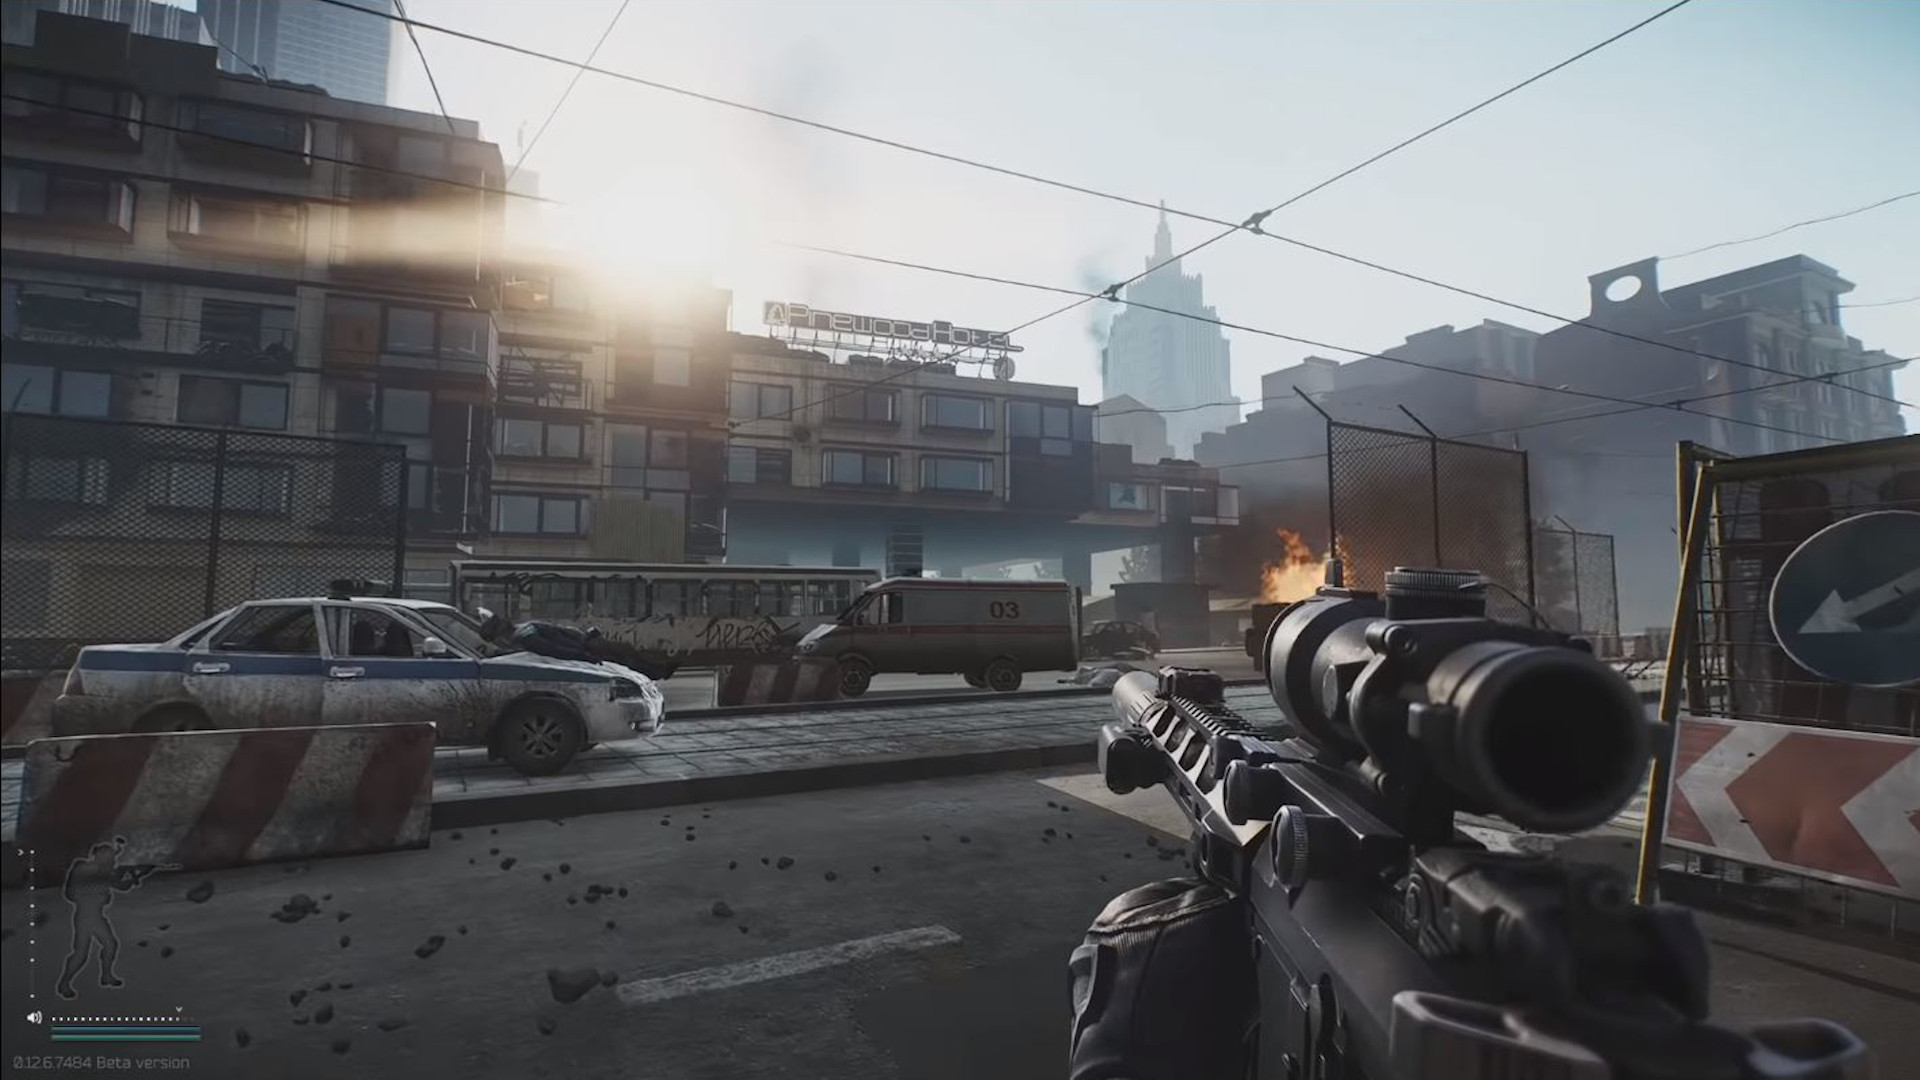 Escape From Tarkov is getting an expansion to an older map before Streets of Tarkov